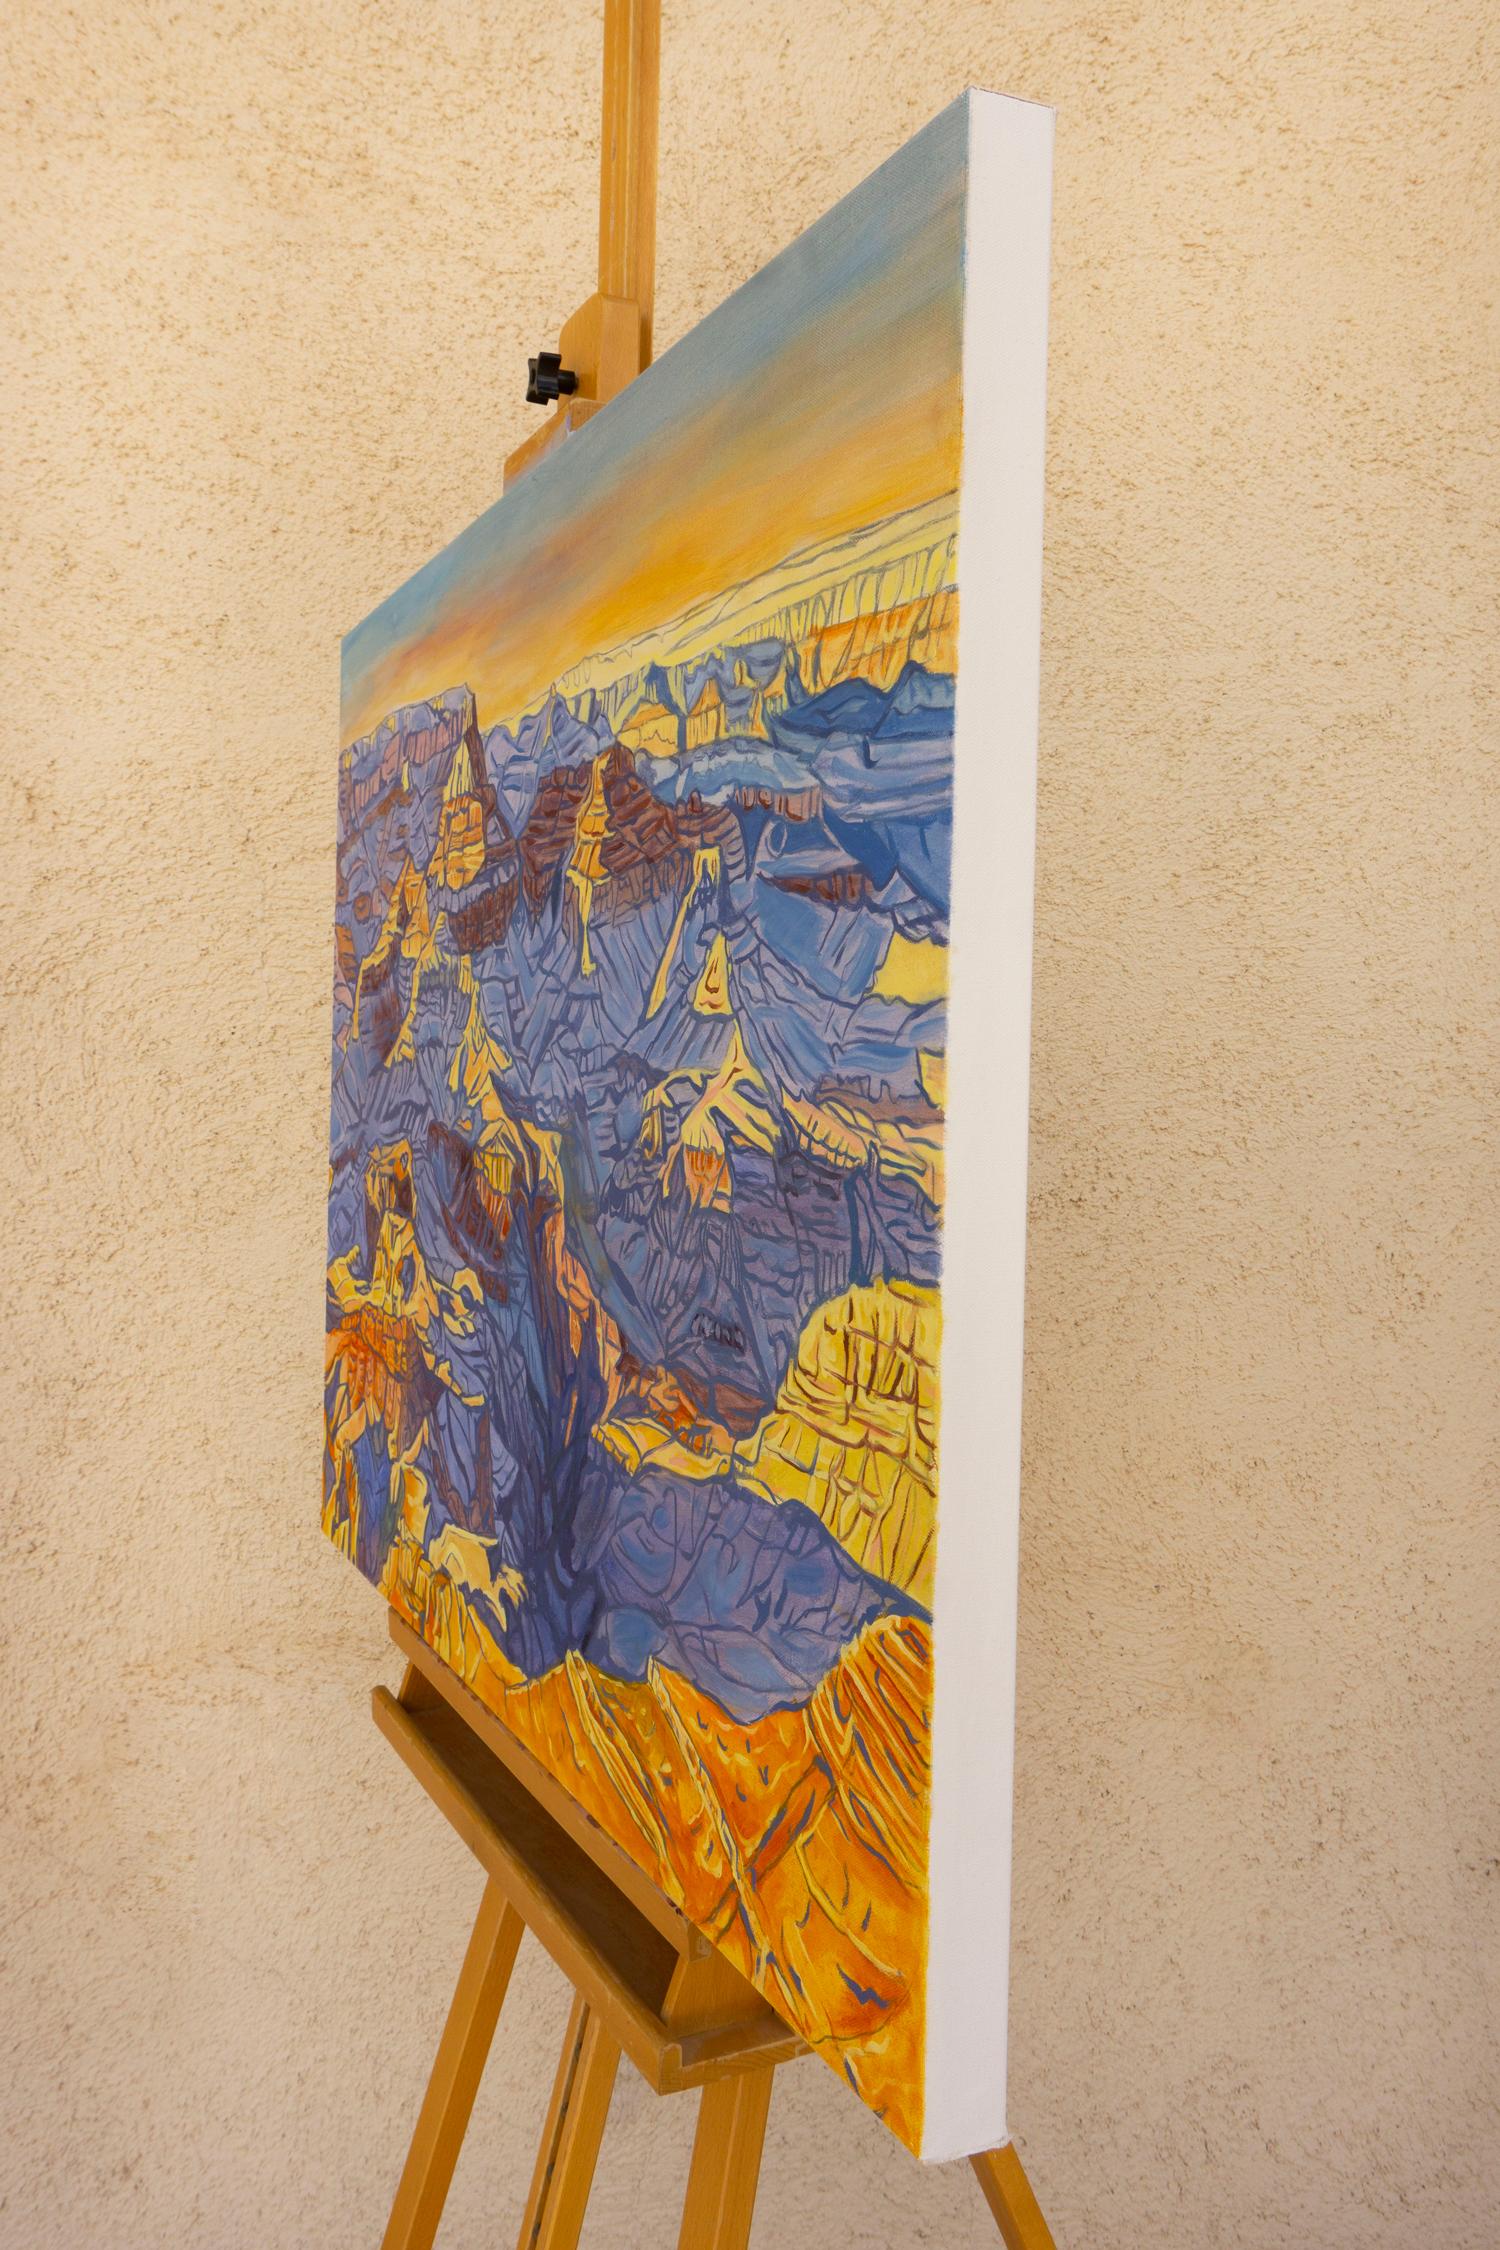 <p>Artist Comments<br />Artist Crystal DiPietro paints a sunset as the warm light descends beyond the horizon. The golden rays illuminate the towering mesas adorned in shades of orange. It creates a striking contrast against the deepening blue hues